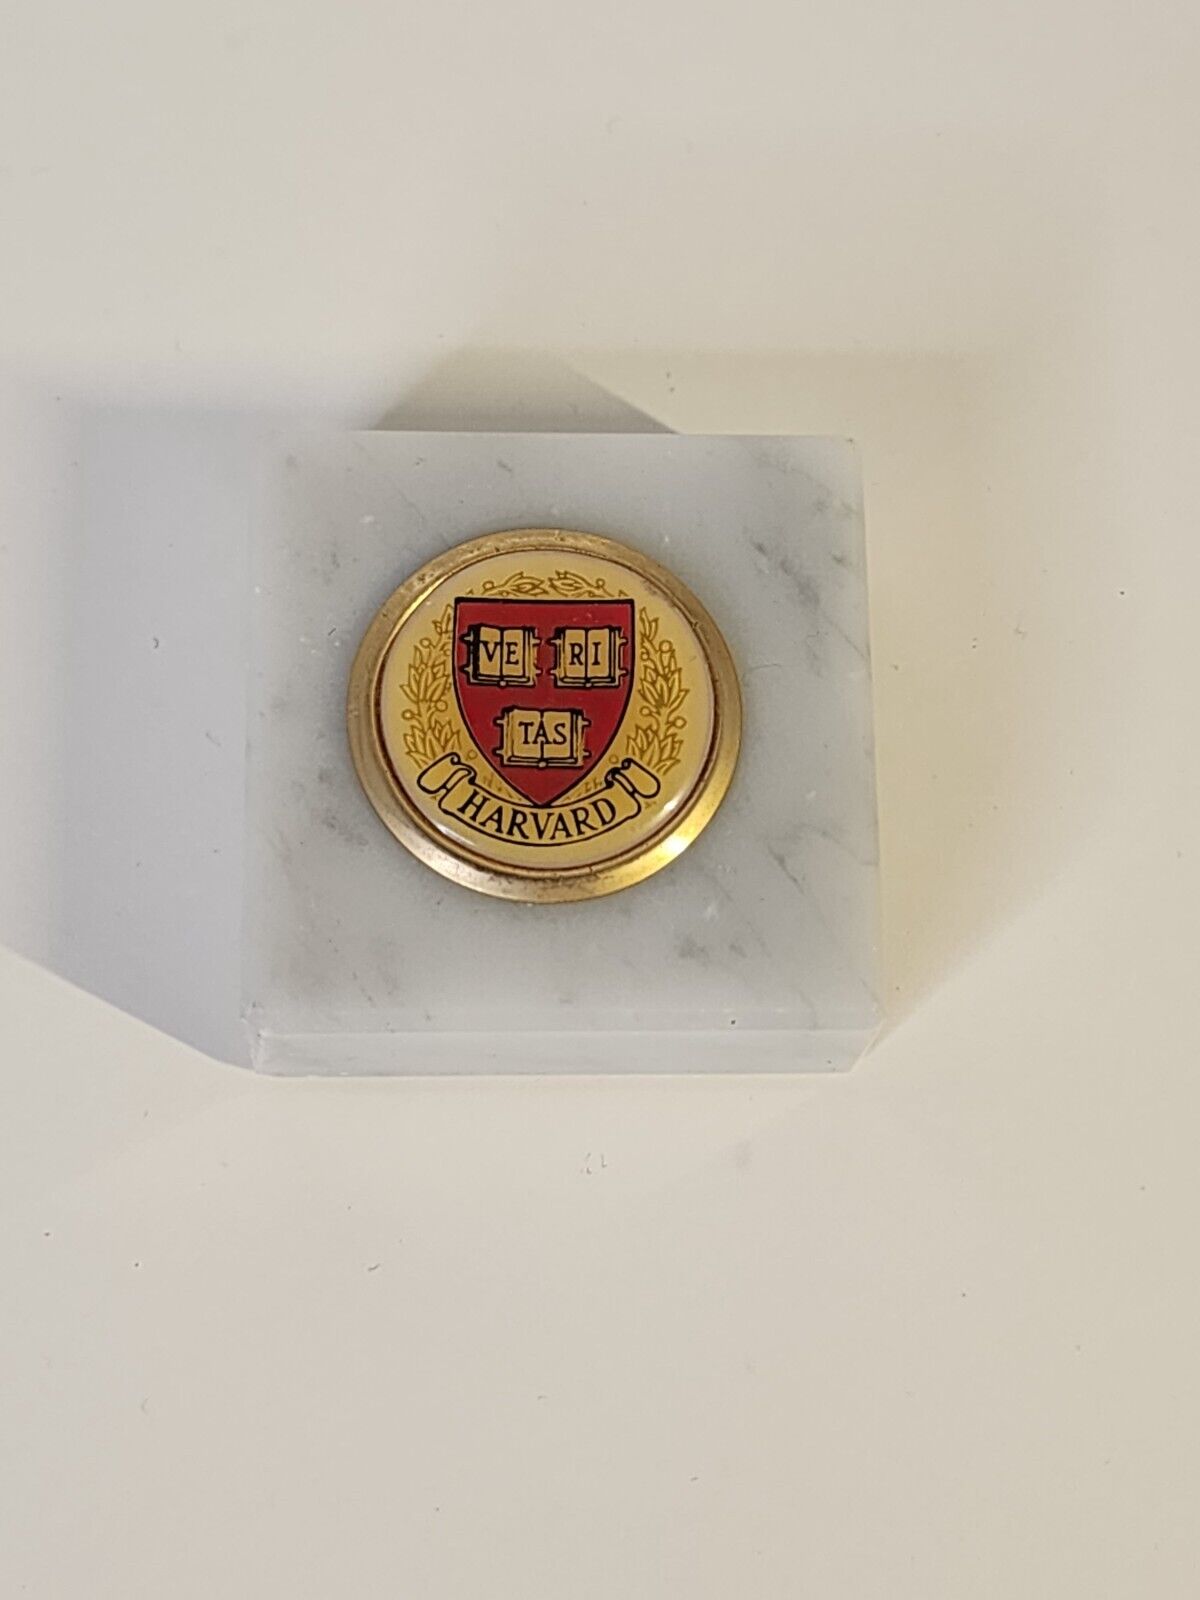 Vintage Harvard 2 Inch Square Italian Marble Paperweight Licensed Product